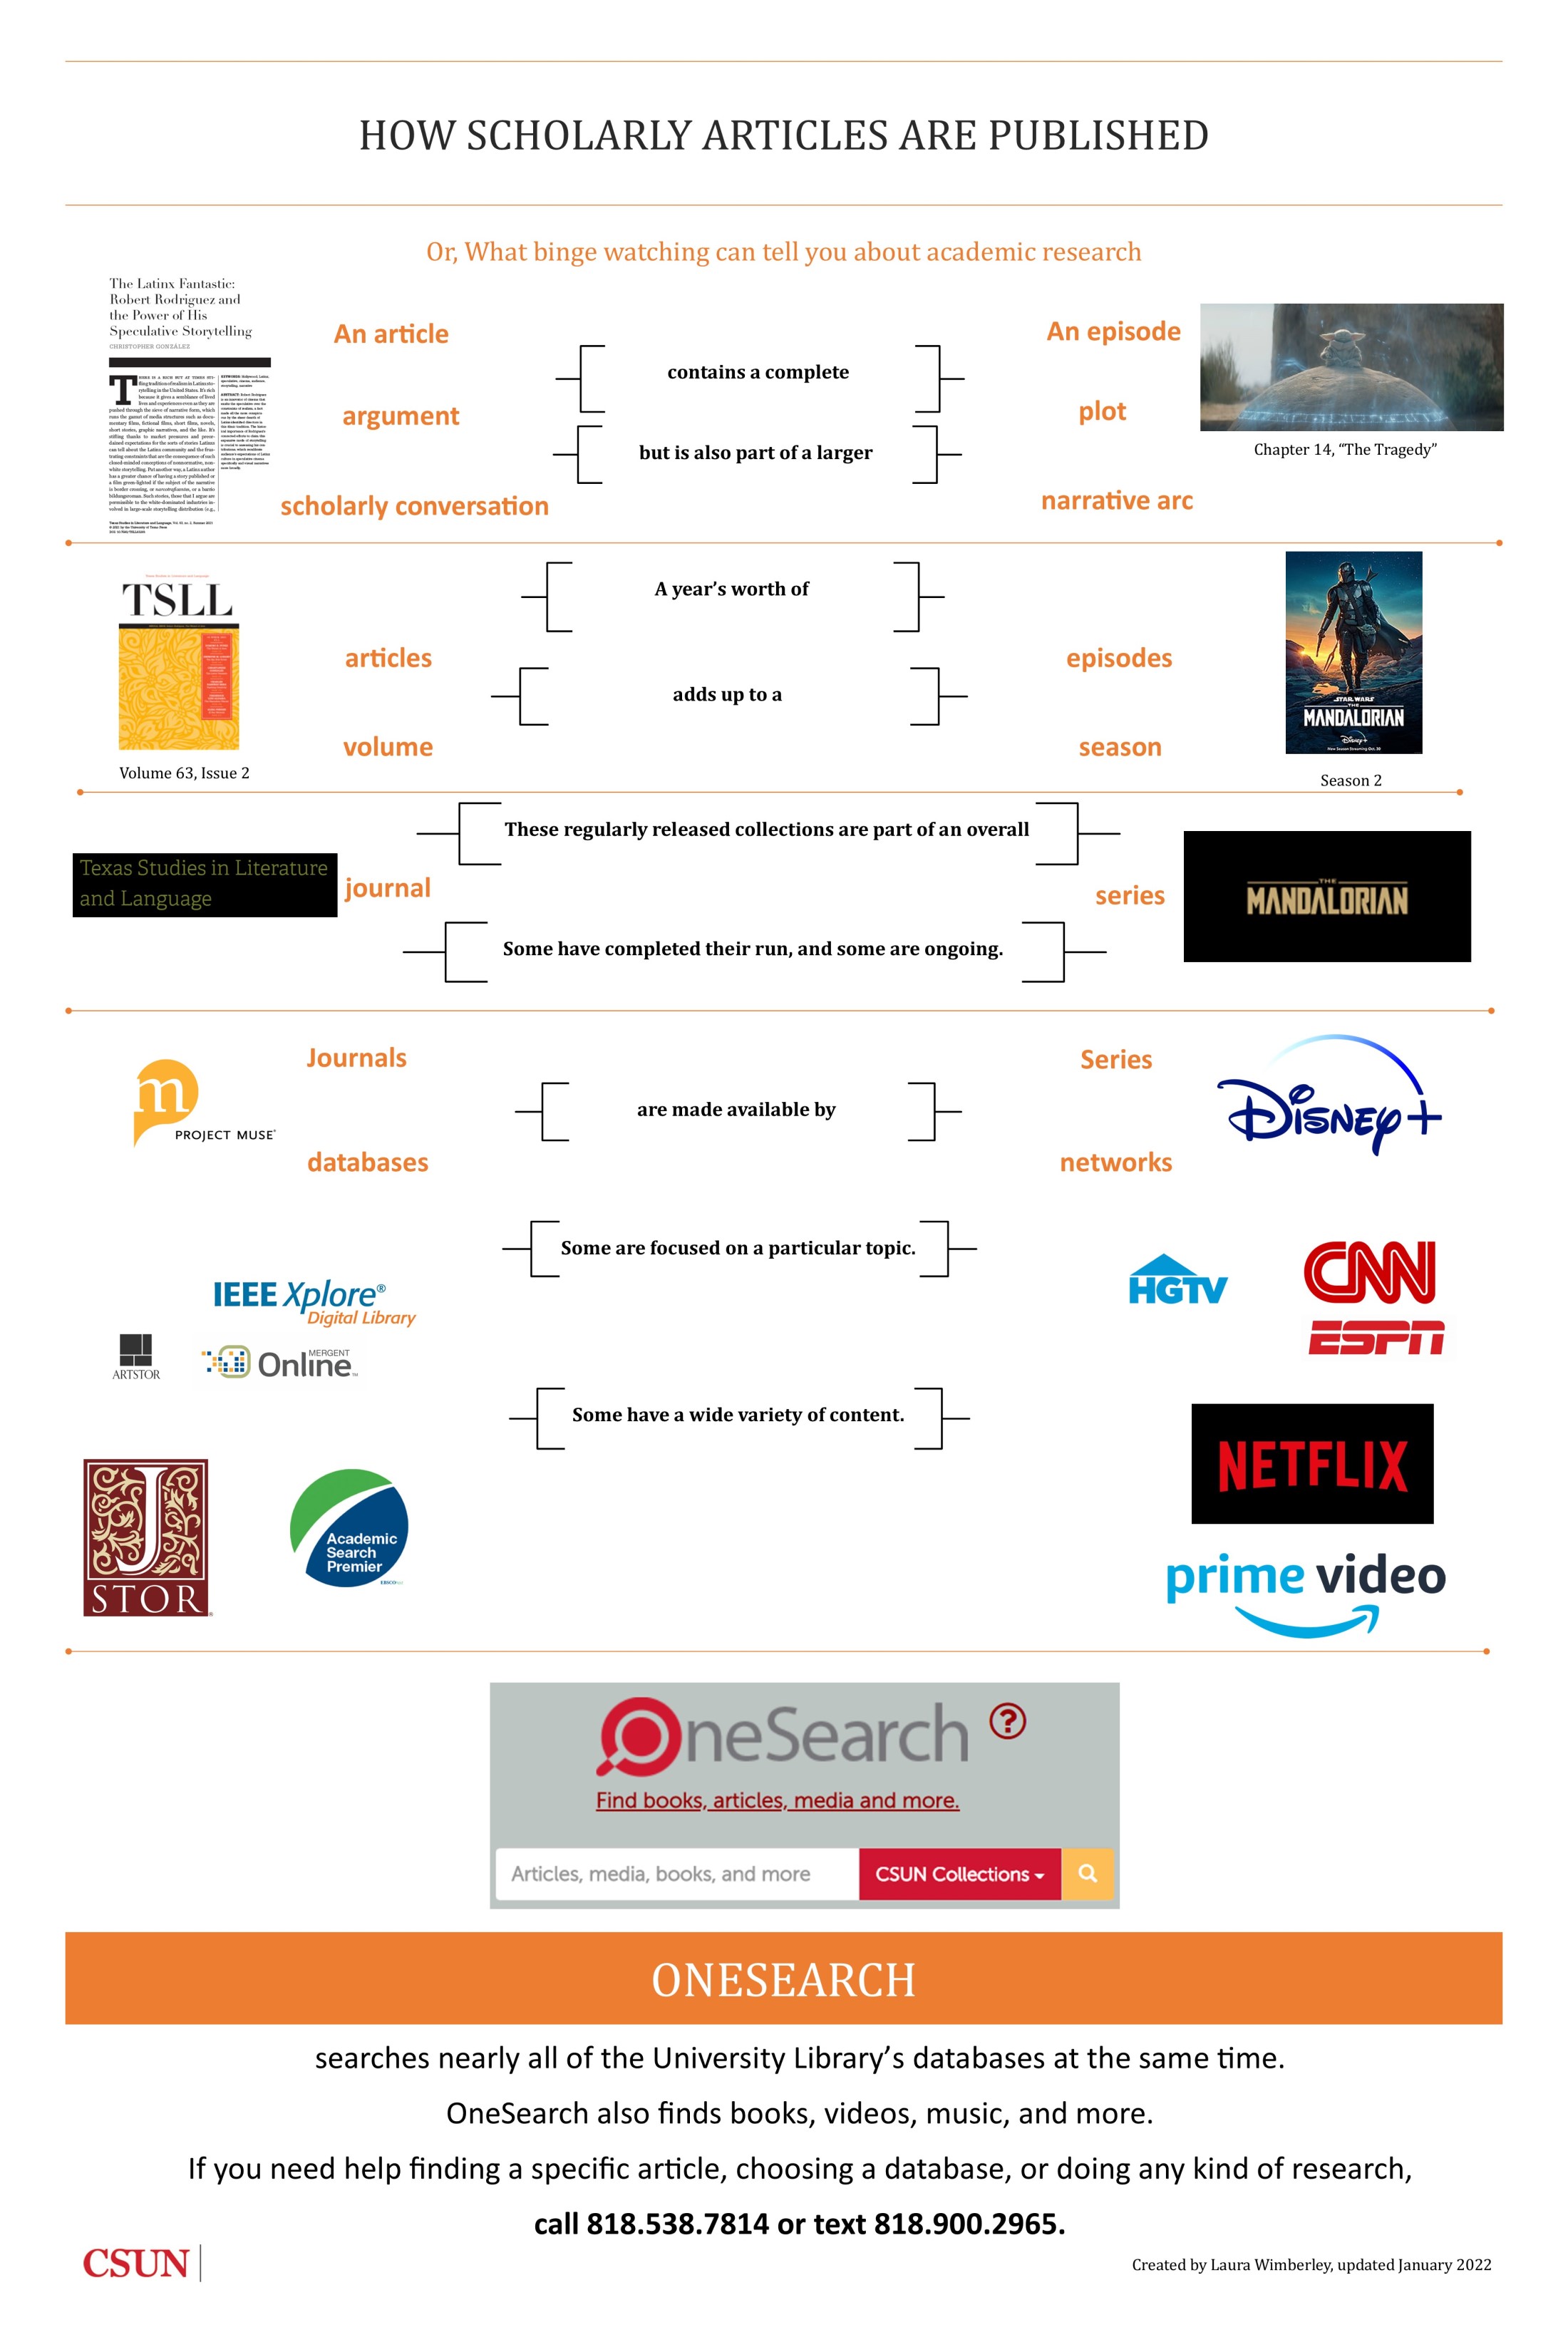 infographic comparing library databases to streaming television services